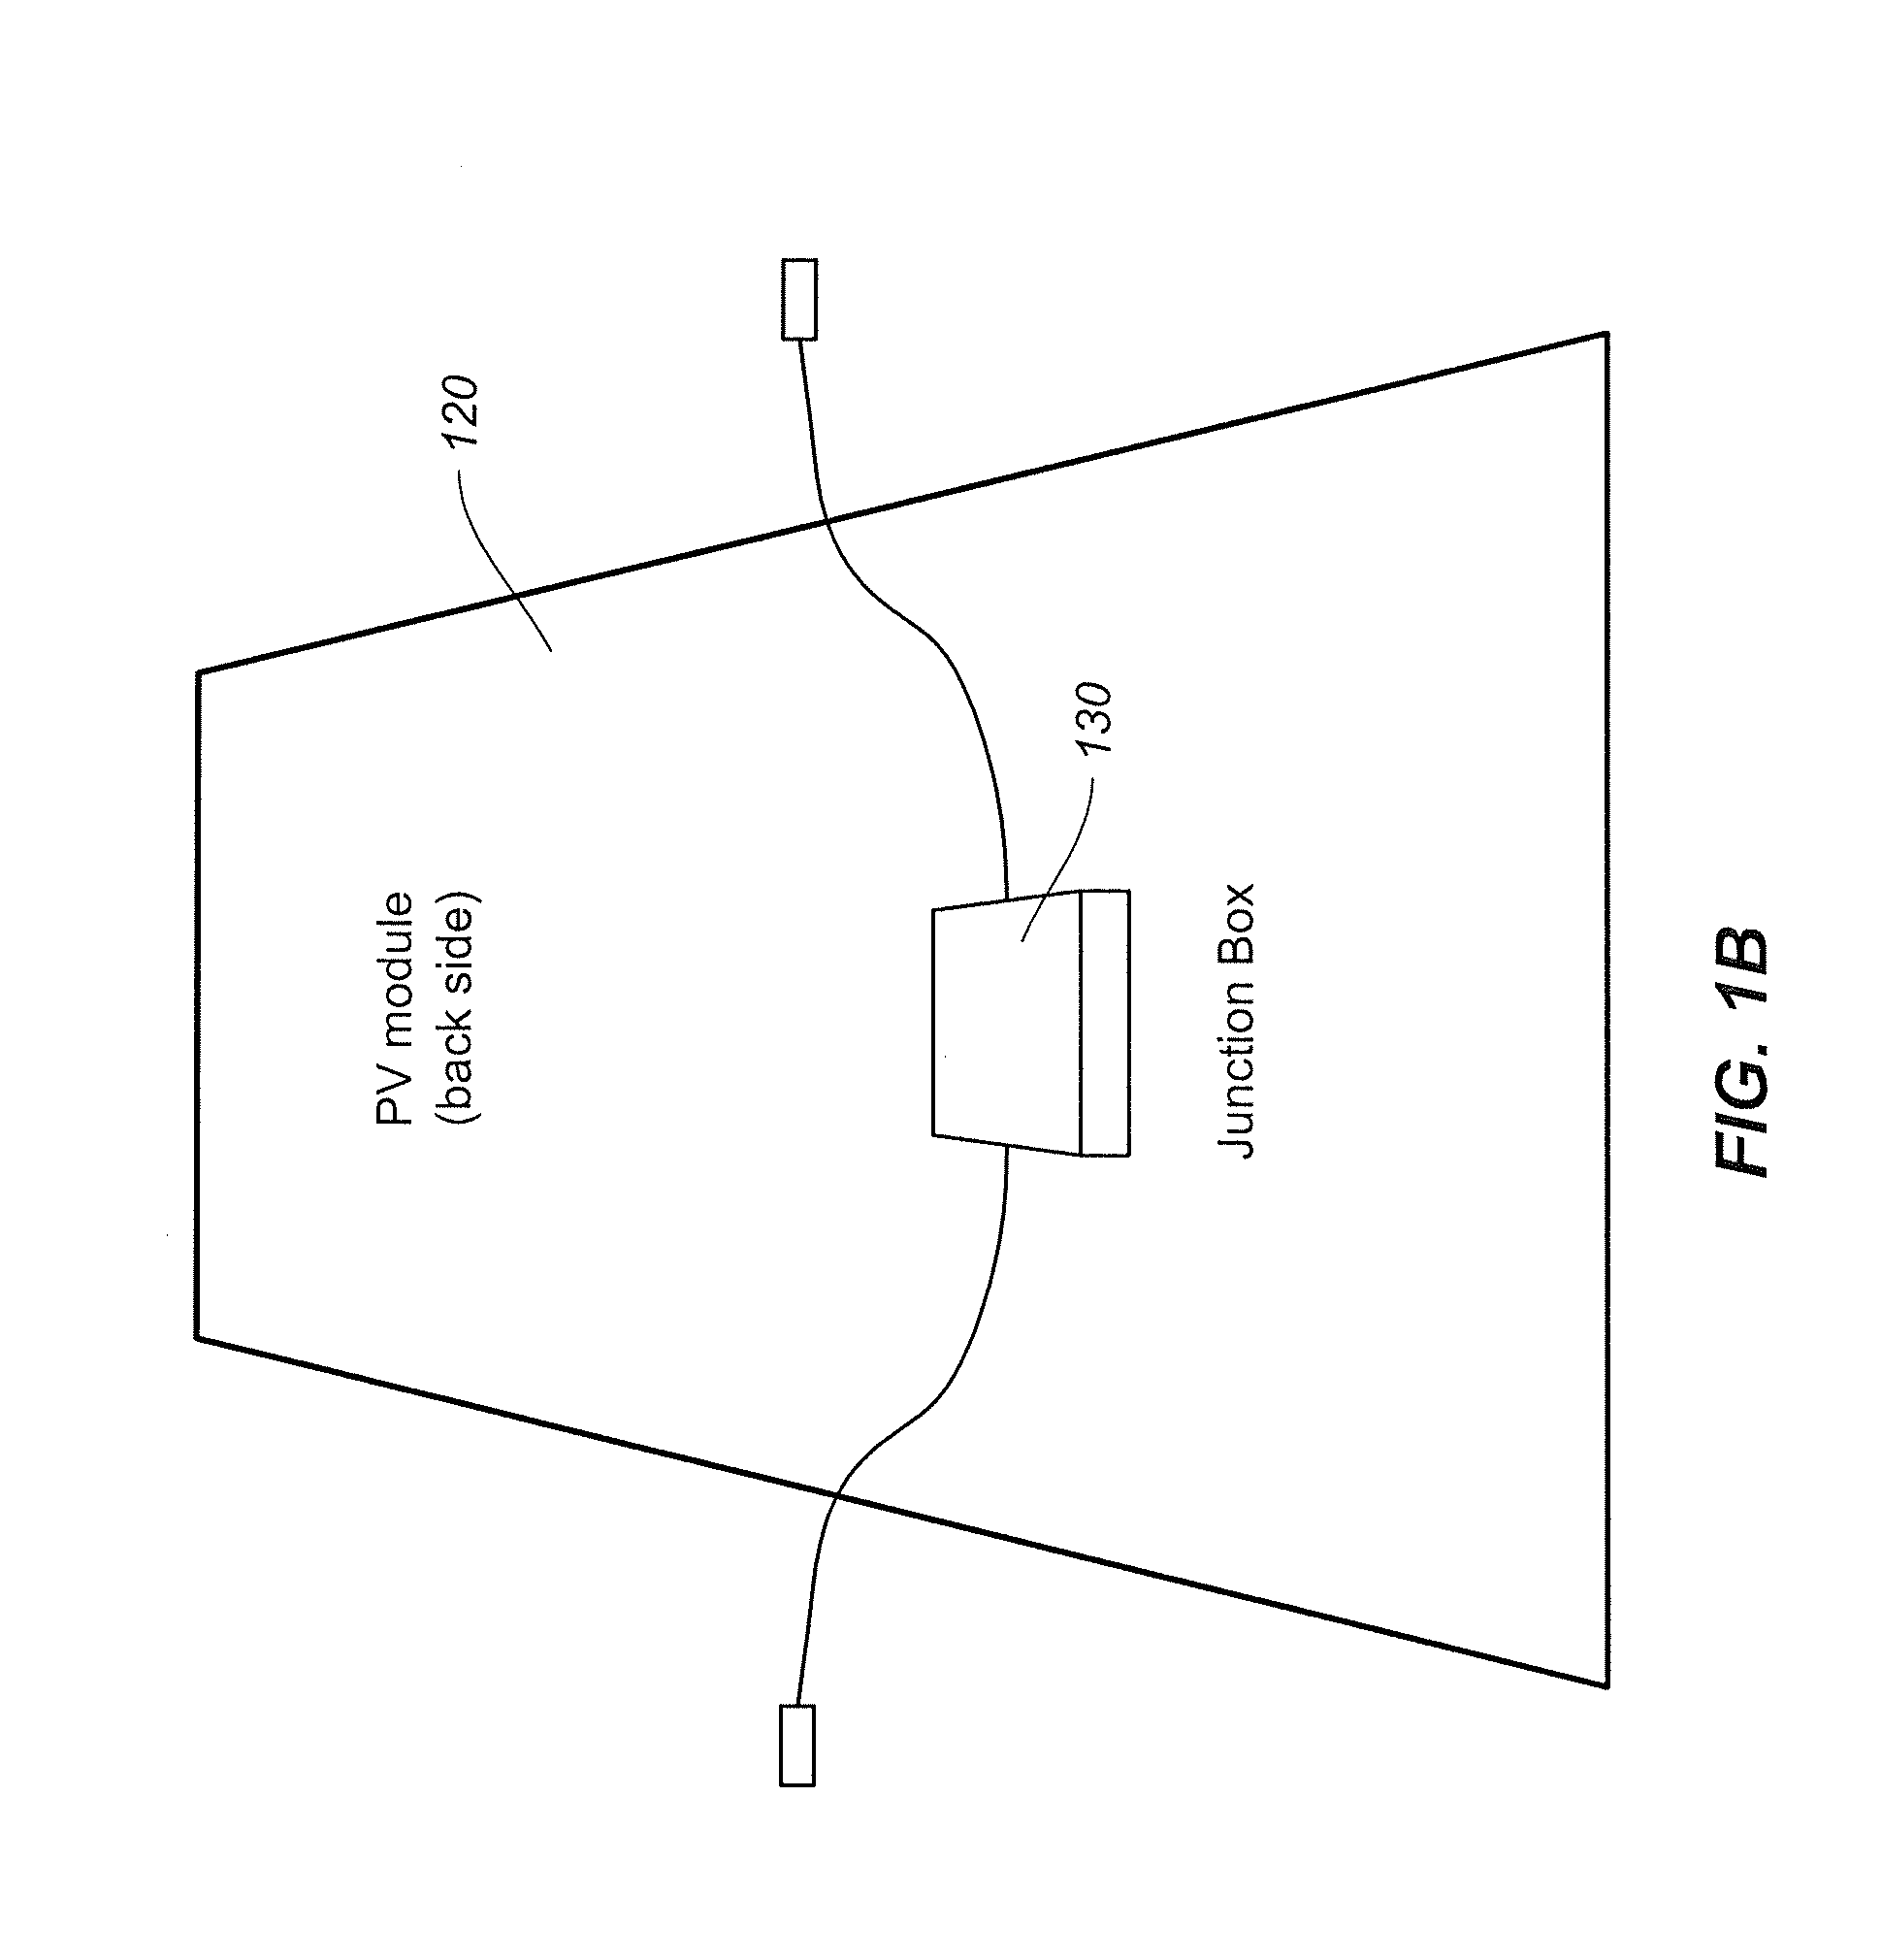 Systems and methods for monitoring and diagnostics of photovoltaic solar modules in photovoltaic systems